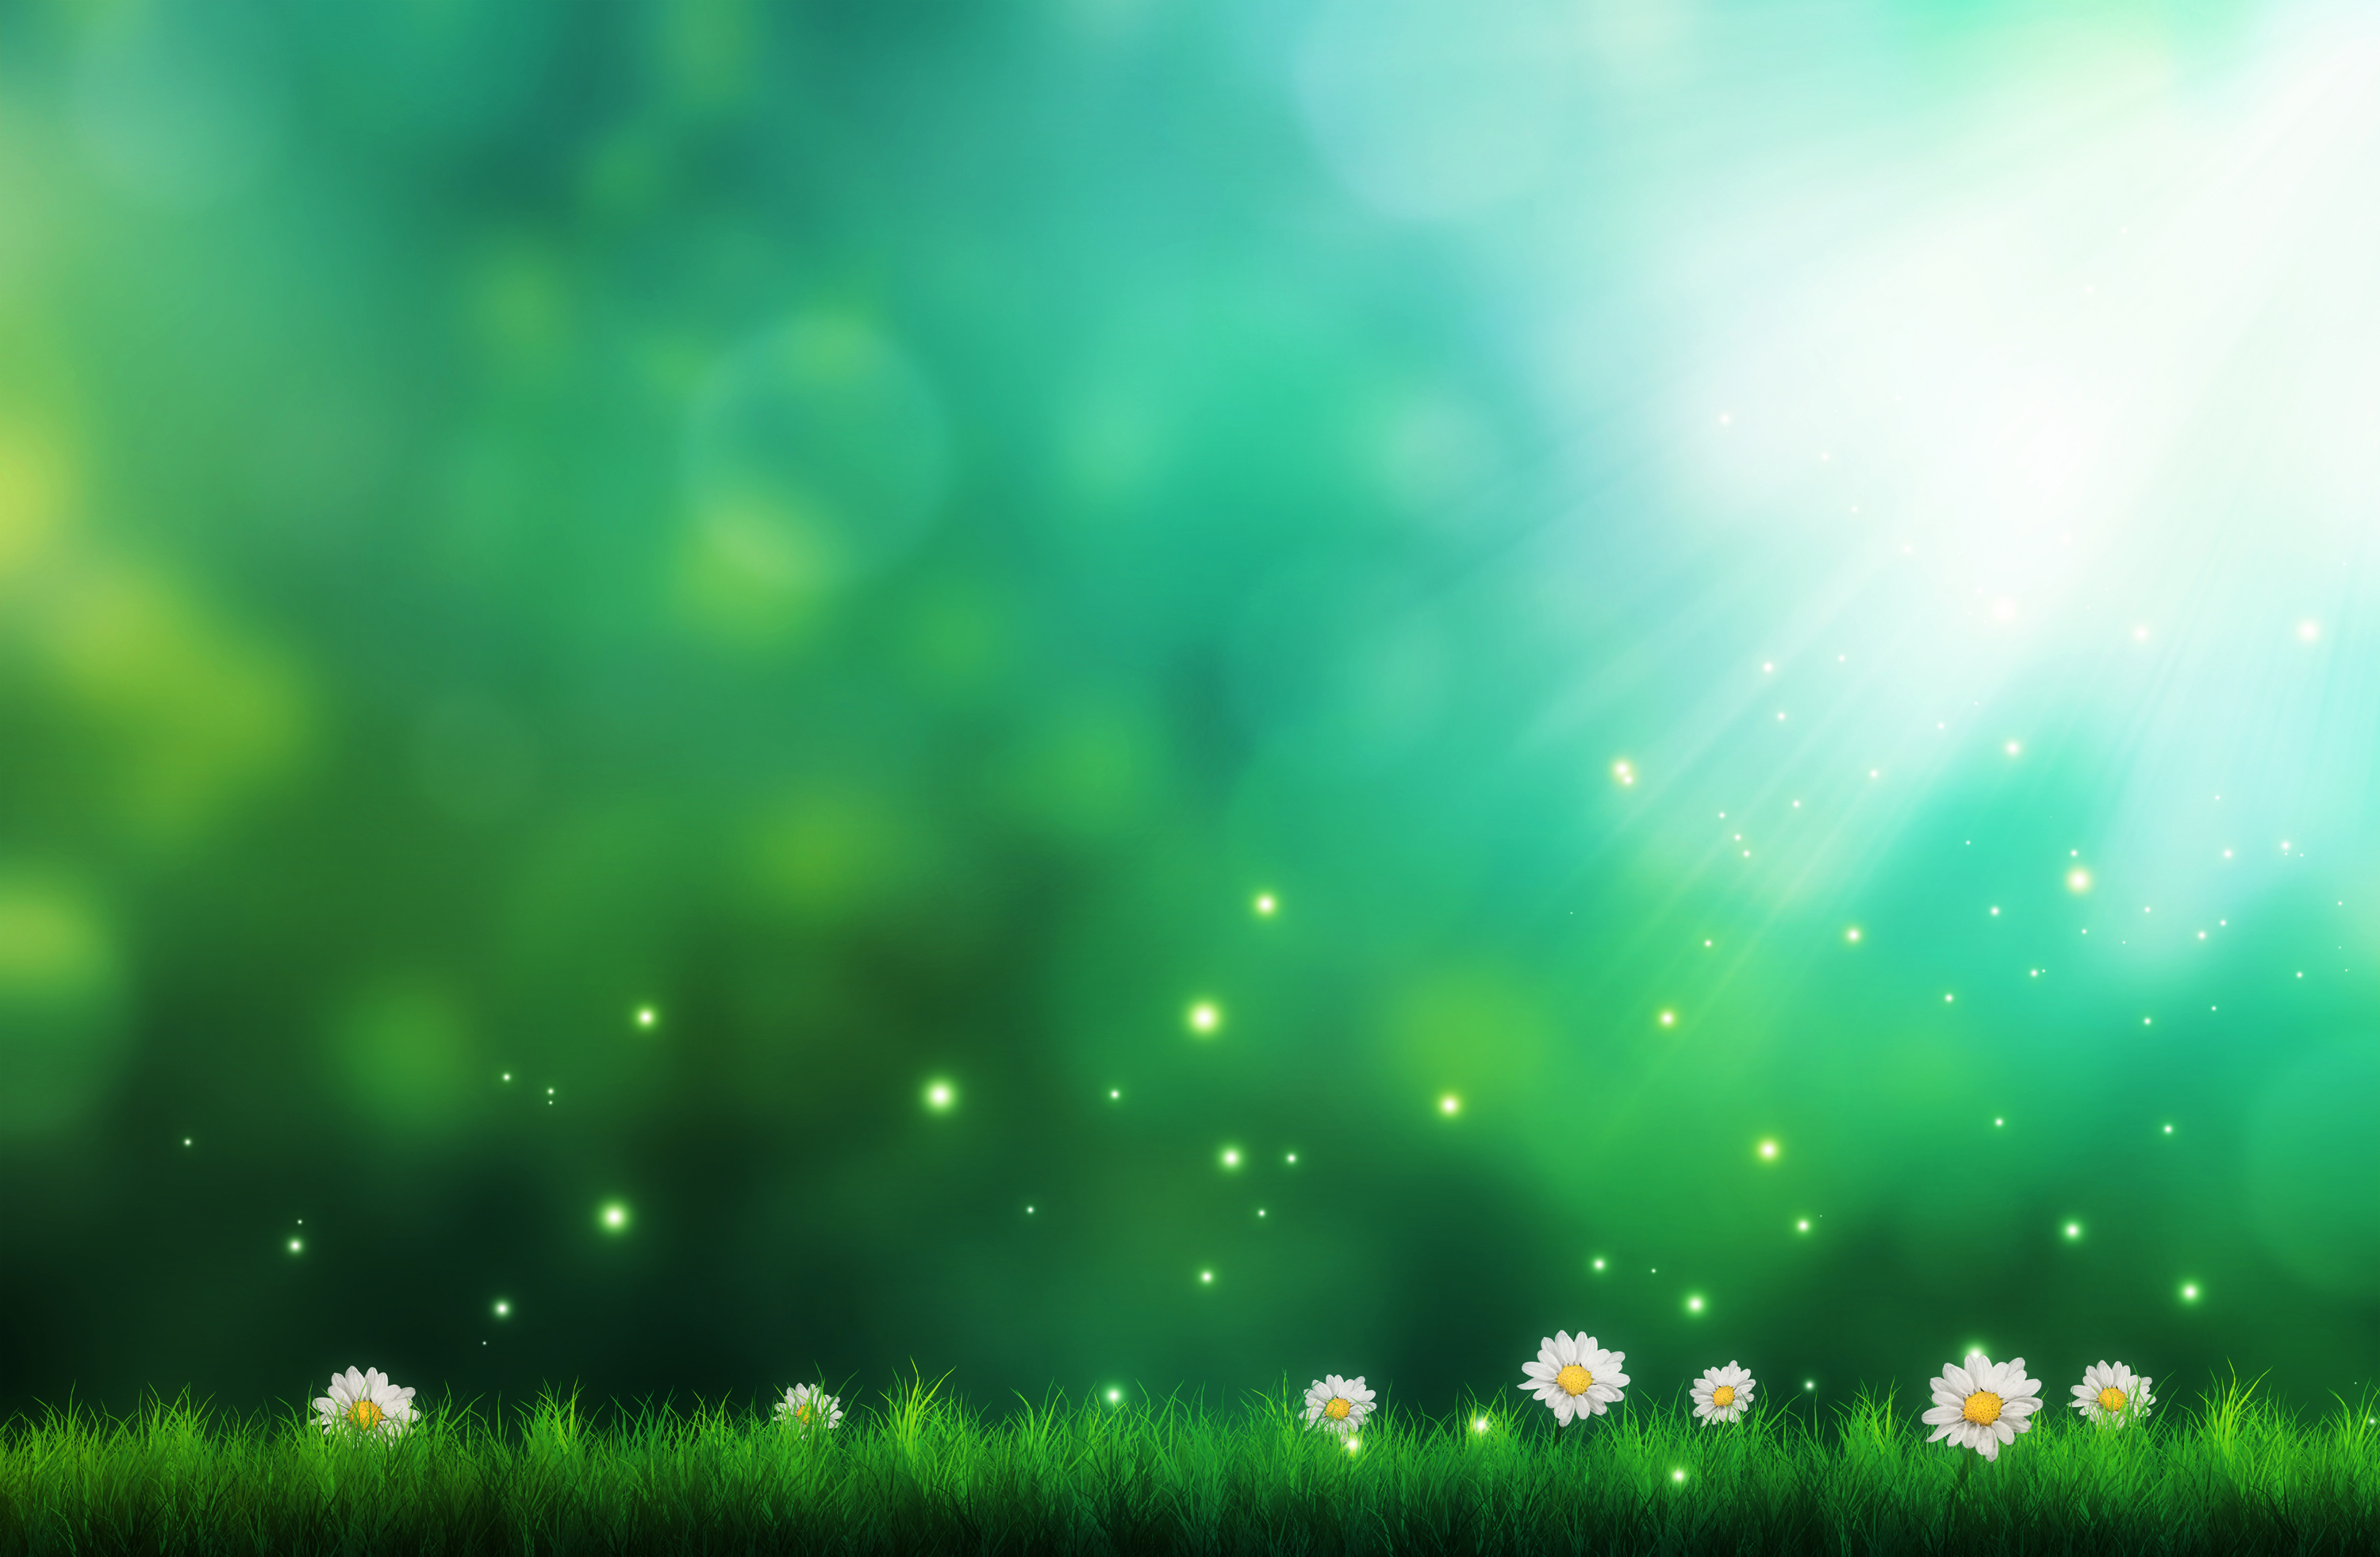 Nature Background Images Hd - 2880x1800 Wallpaper 